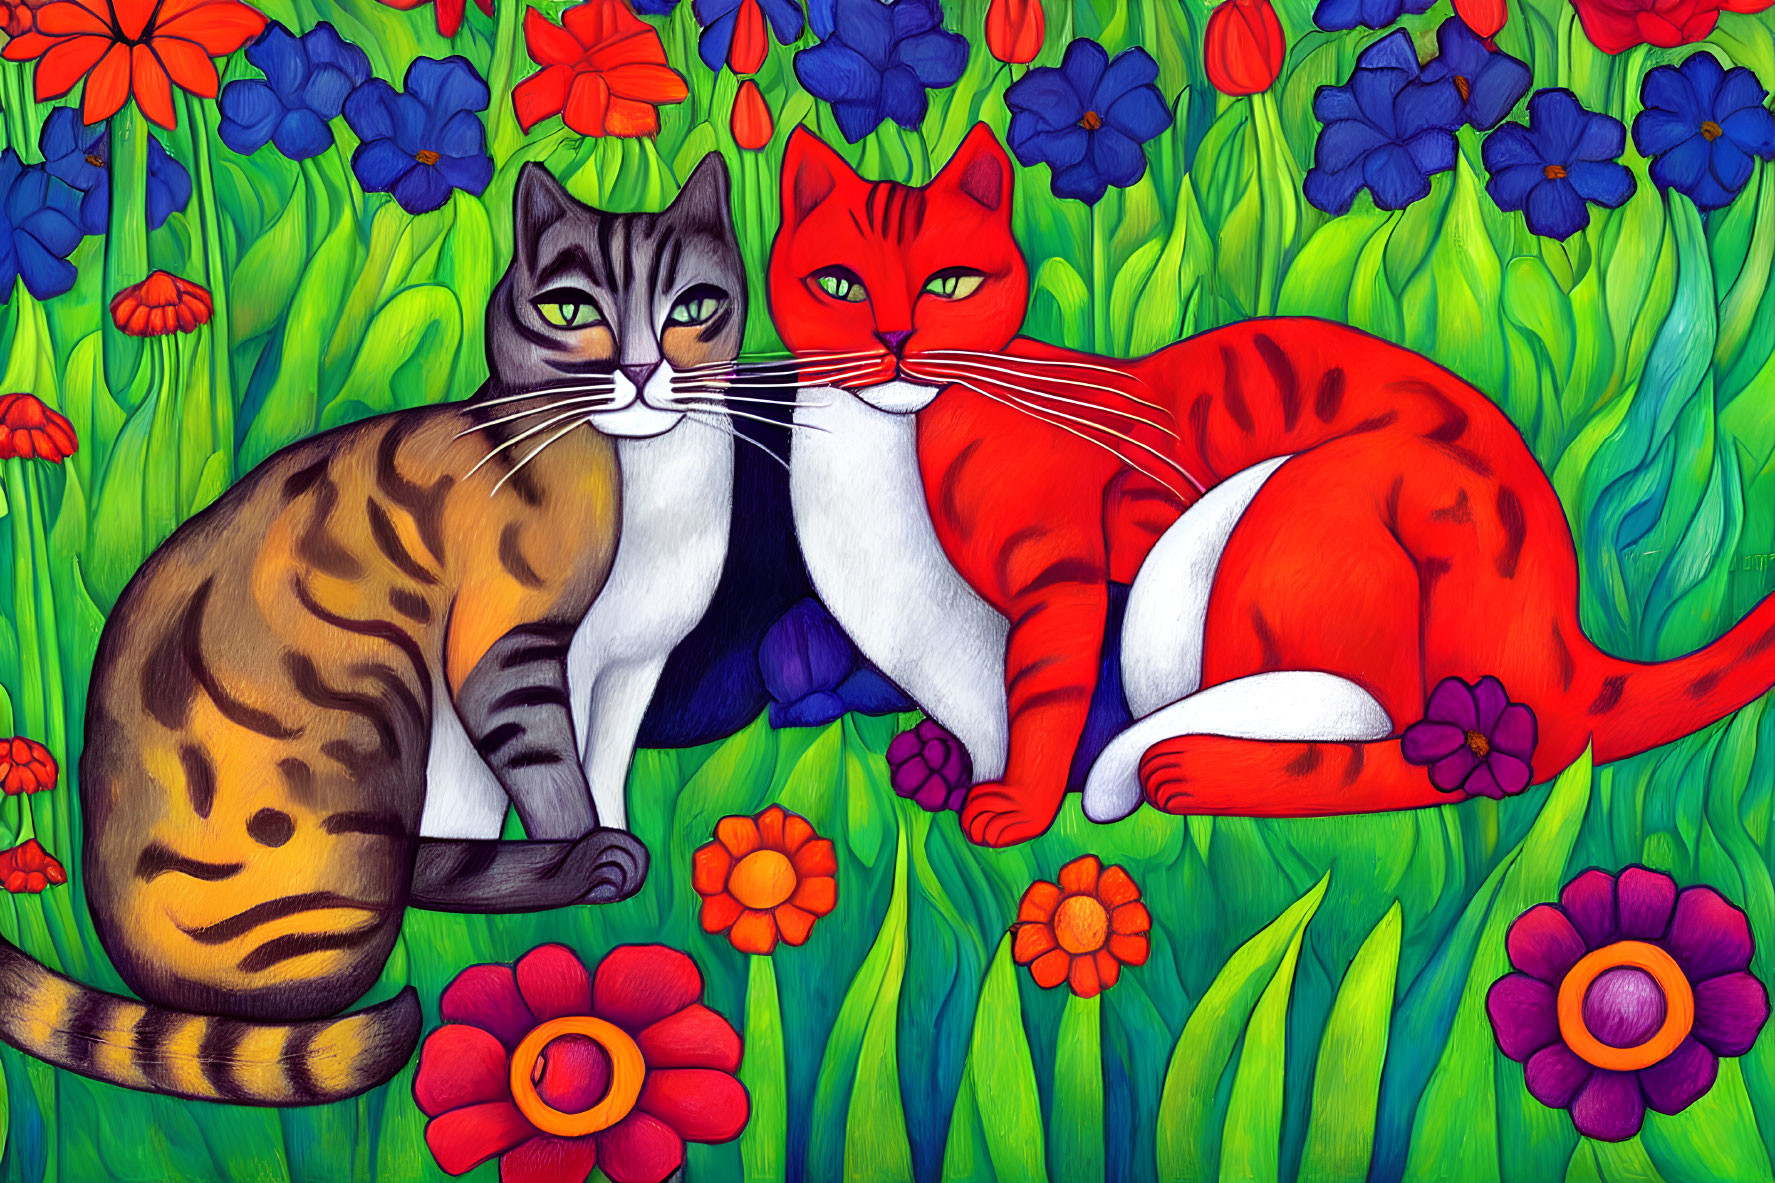 Stylized gray and red cats cuddle in vibrant floral setting